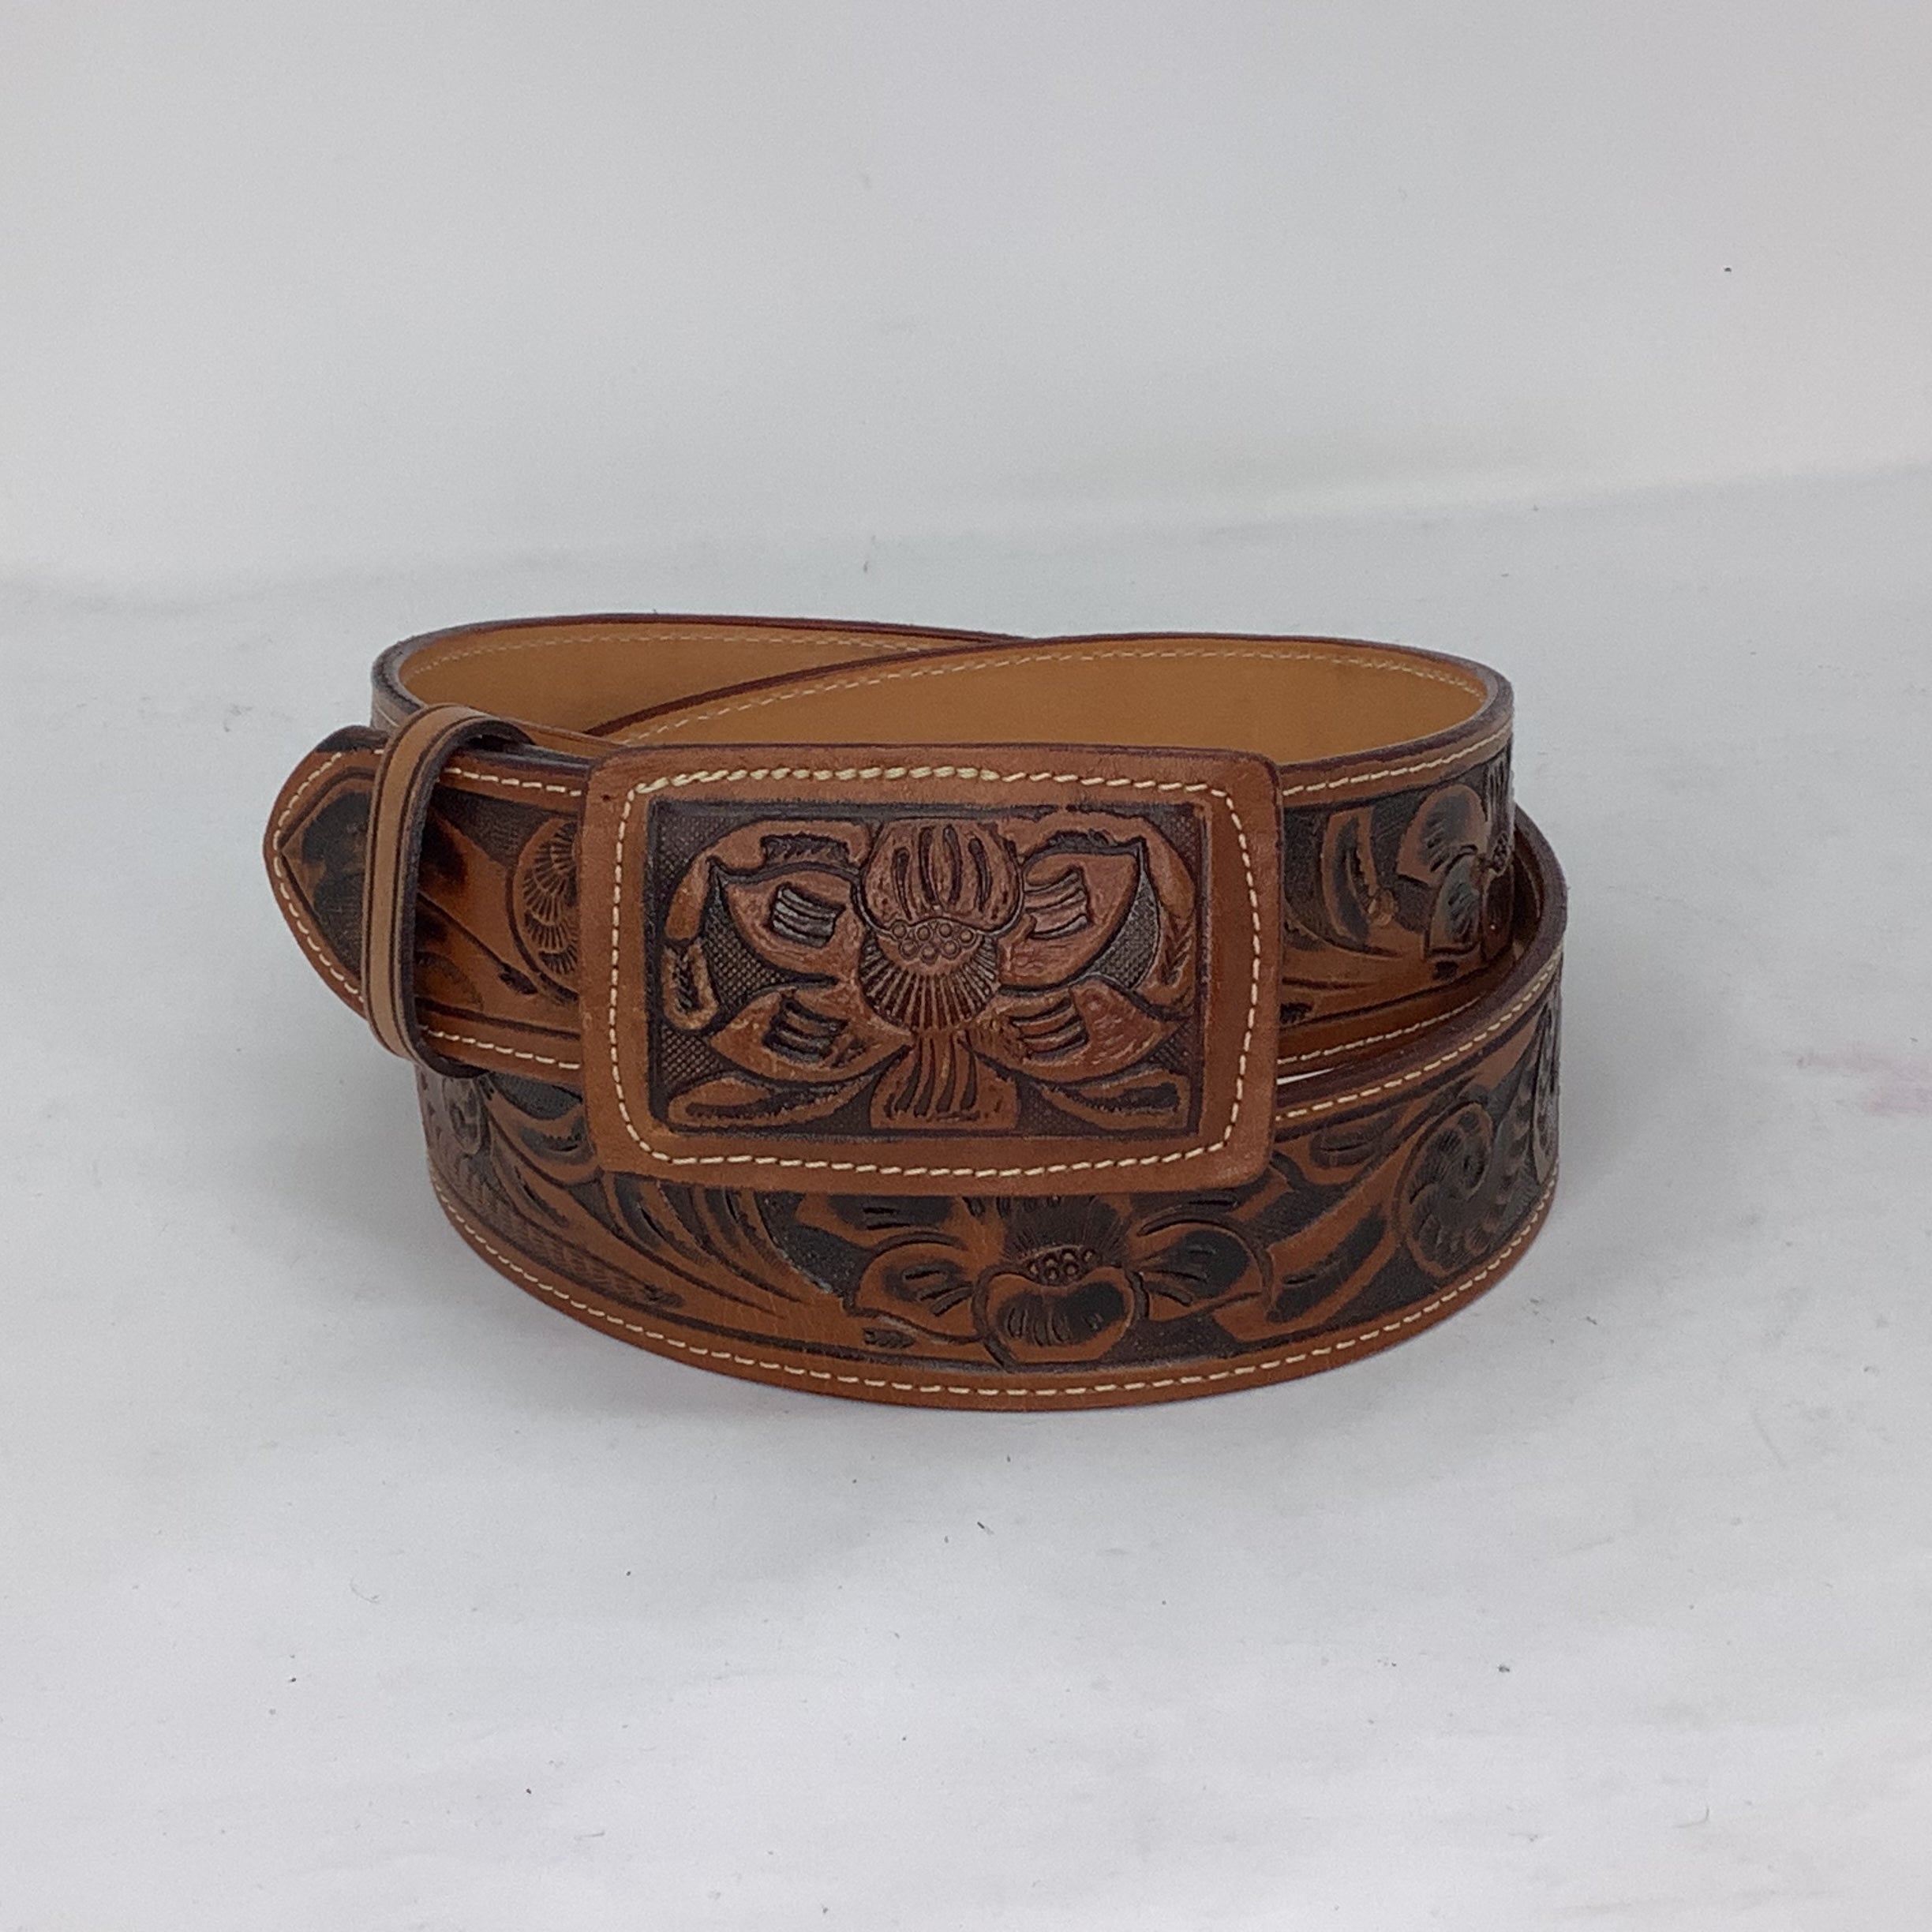 “Lacey” Floral Stamp Leather Belt